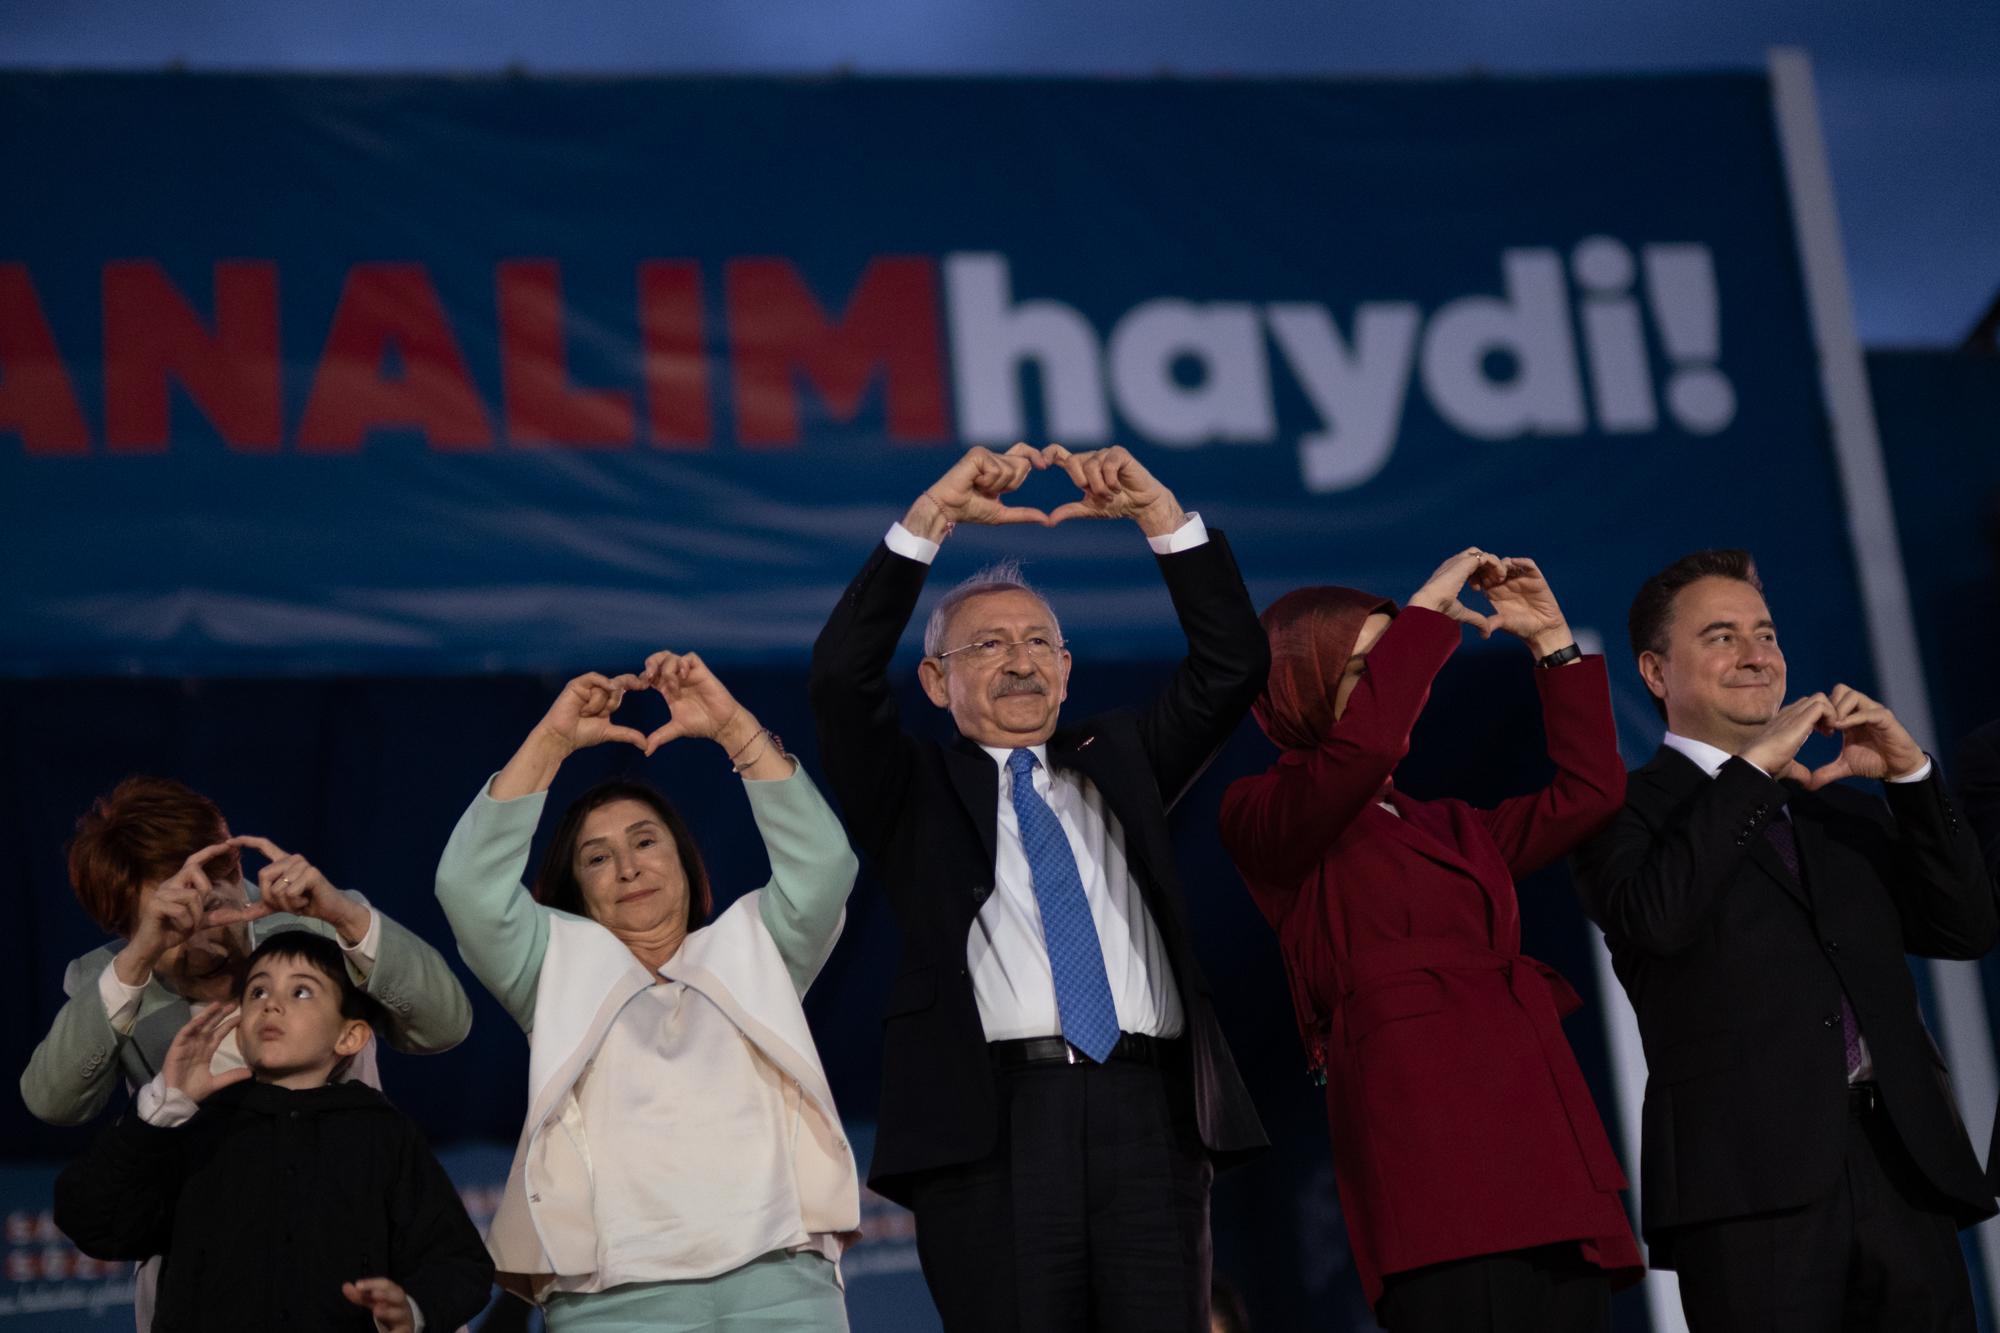 General elections in Turkey - 2023 - Thousands of people gathered in Maltepe, on the Asian...